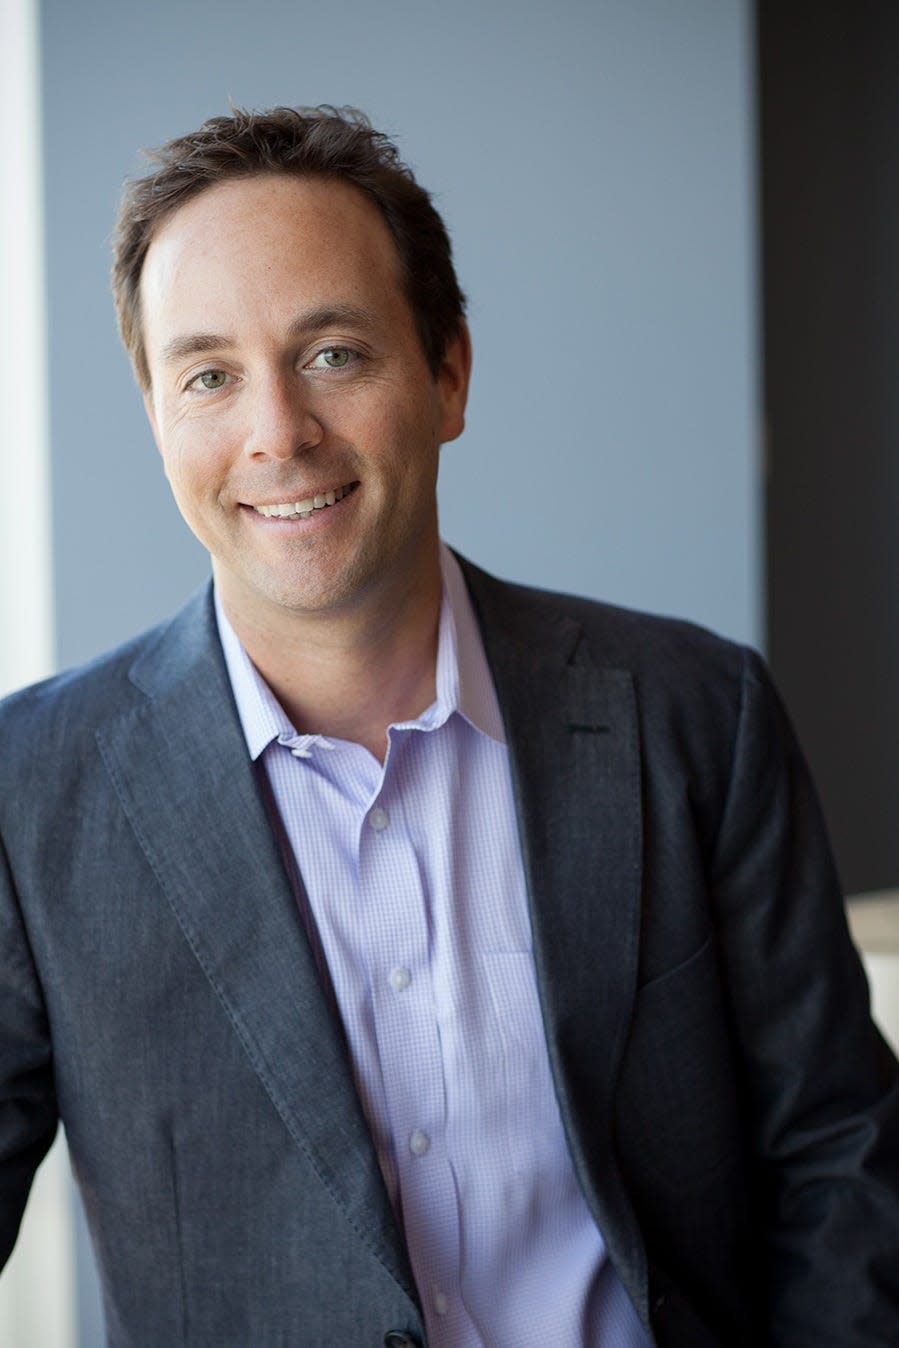 Hotwire, Zillow Co-Founder and acclaimed entrepreneur Spencer Rascoff will be the Power Forward speaker in 2023.